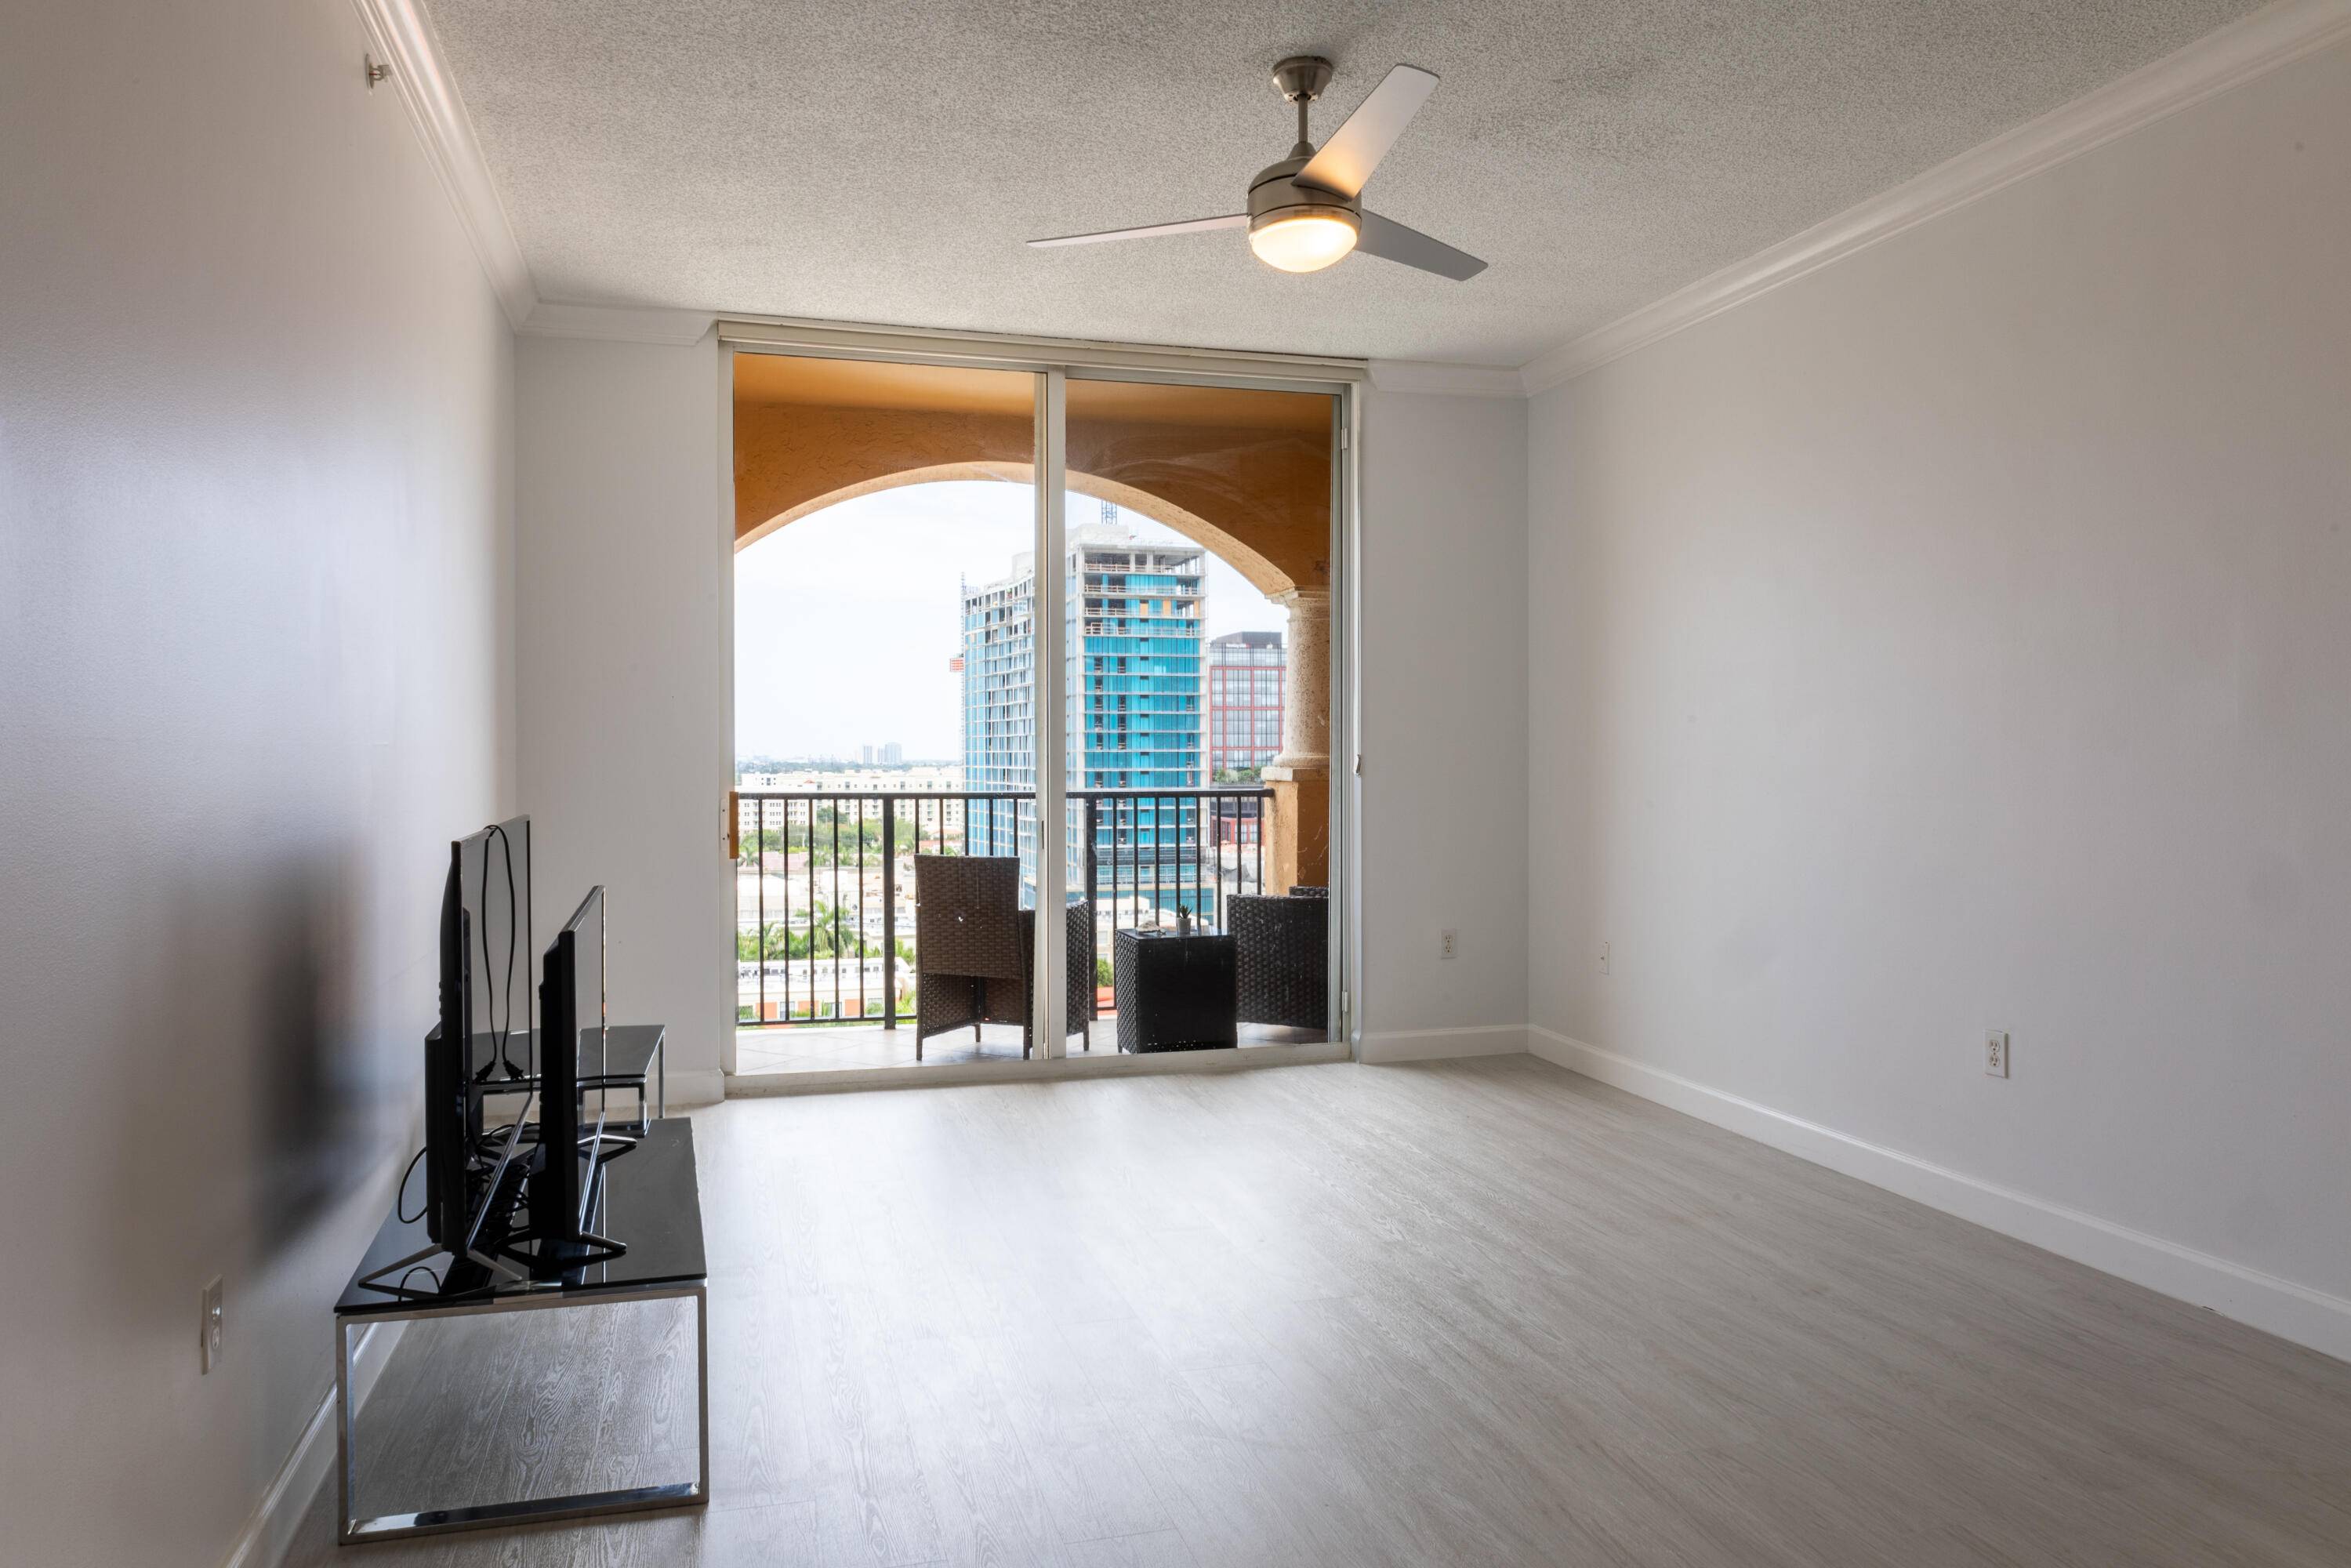 Renovated Furnished Top Floor Penthouse Corner Unit for Rent in the heart of Downtown West Palm, only 8 units on floor.